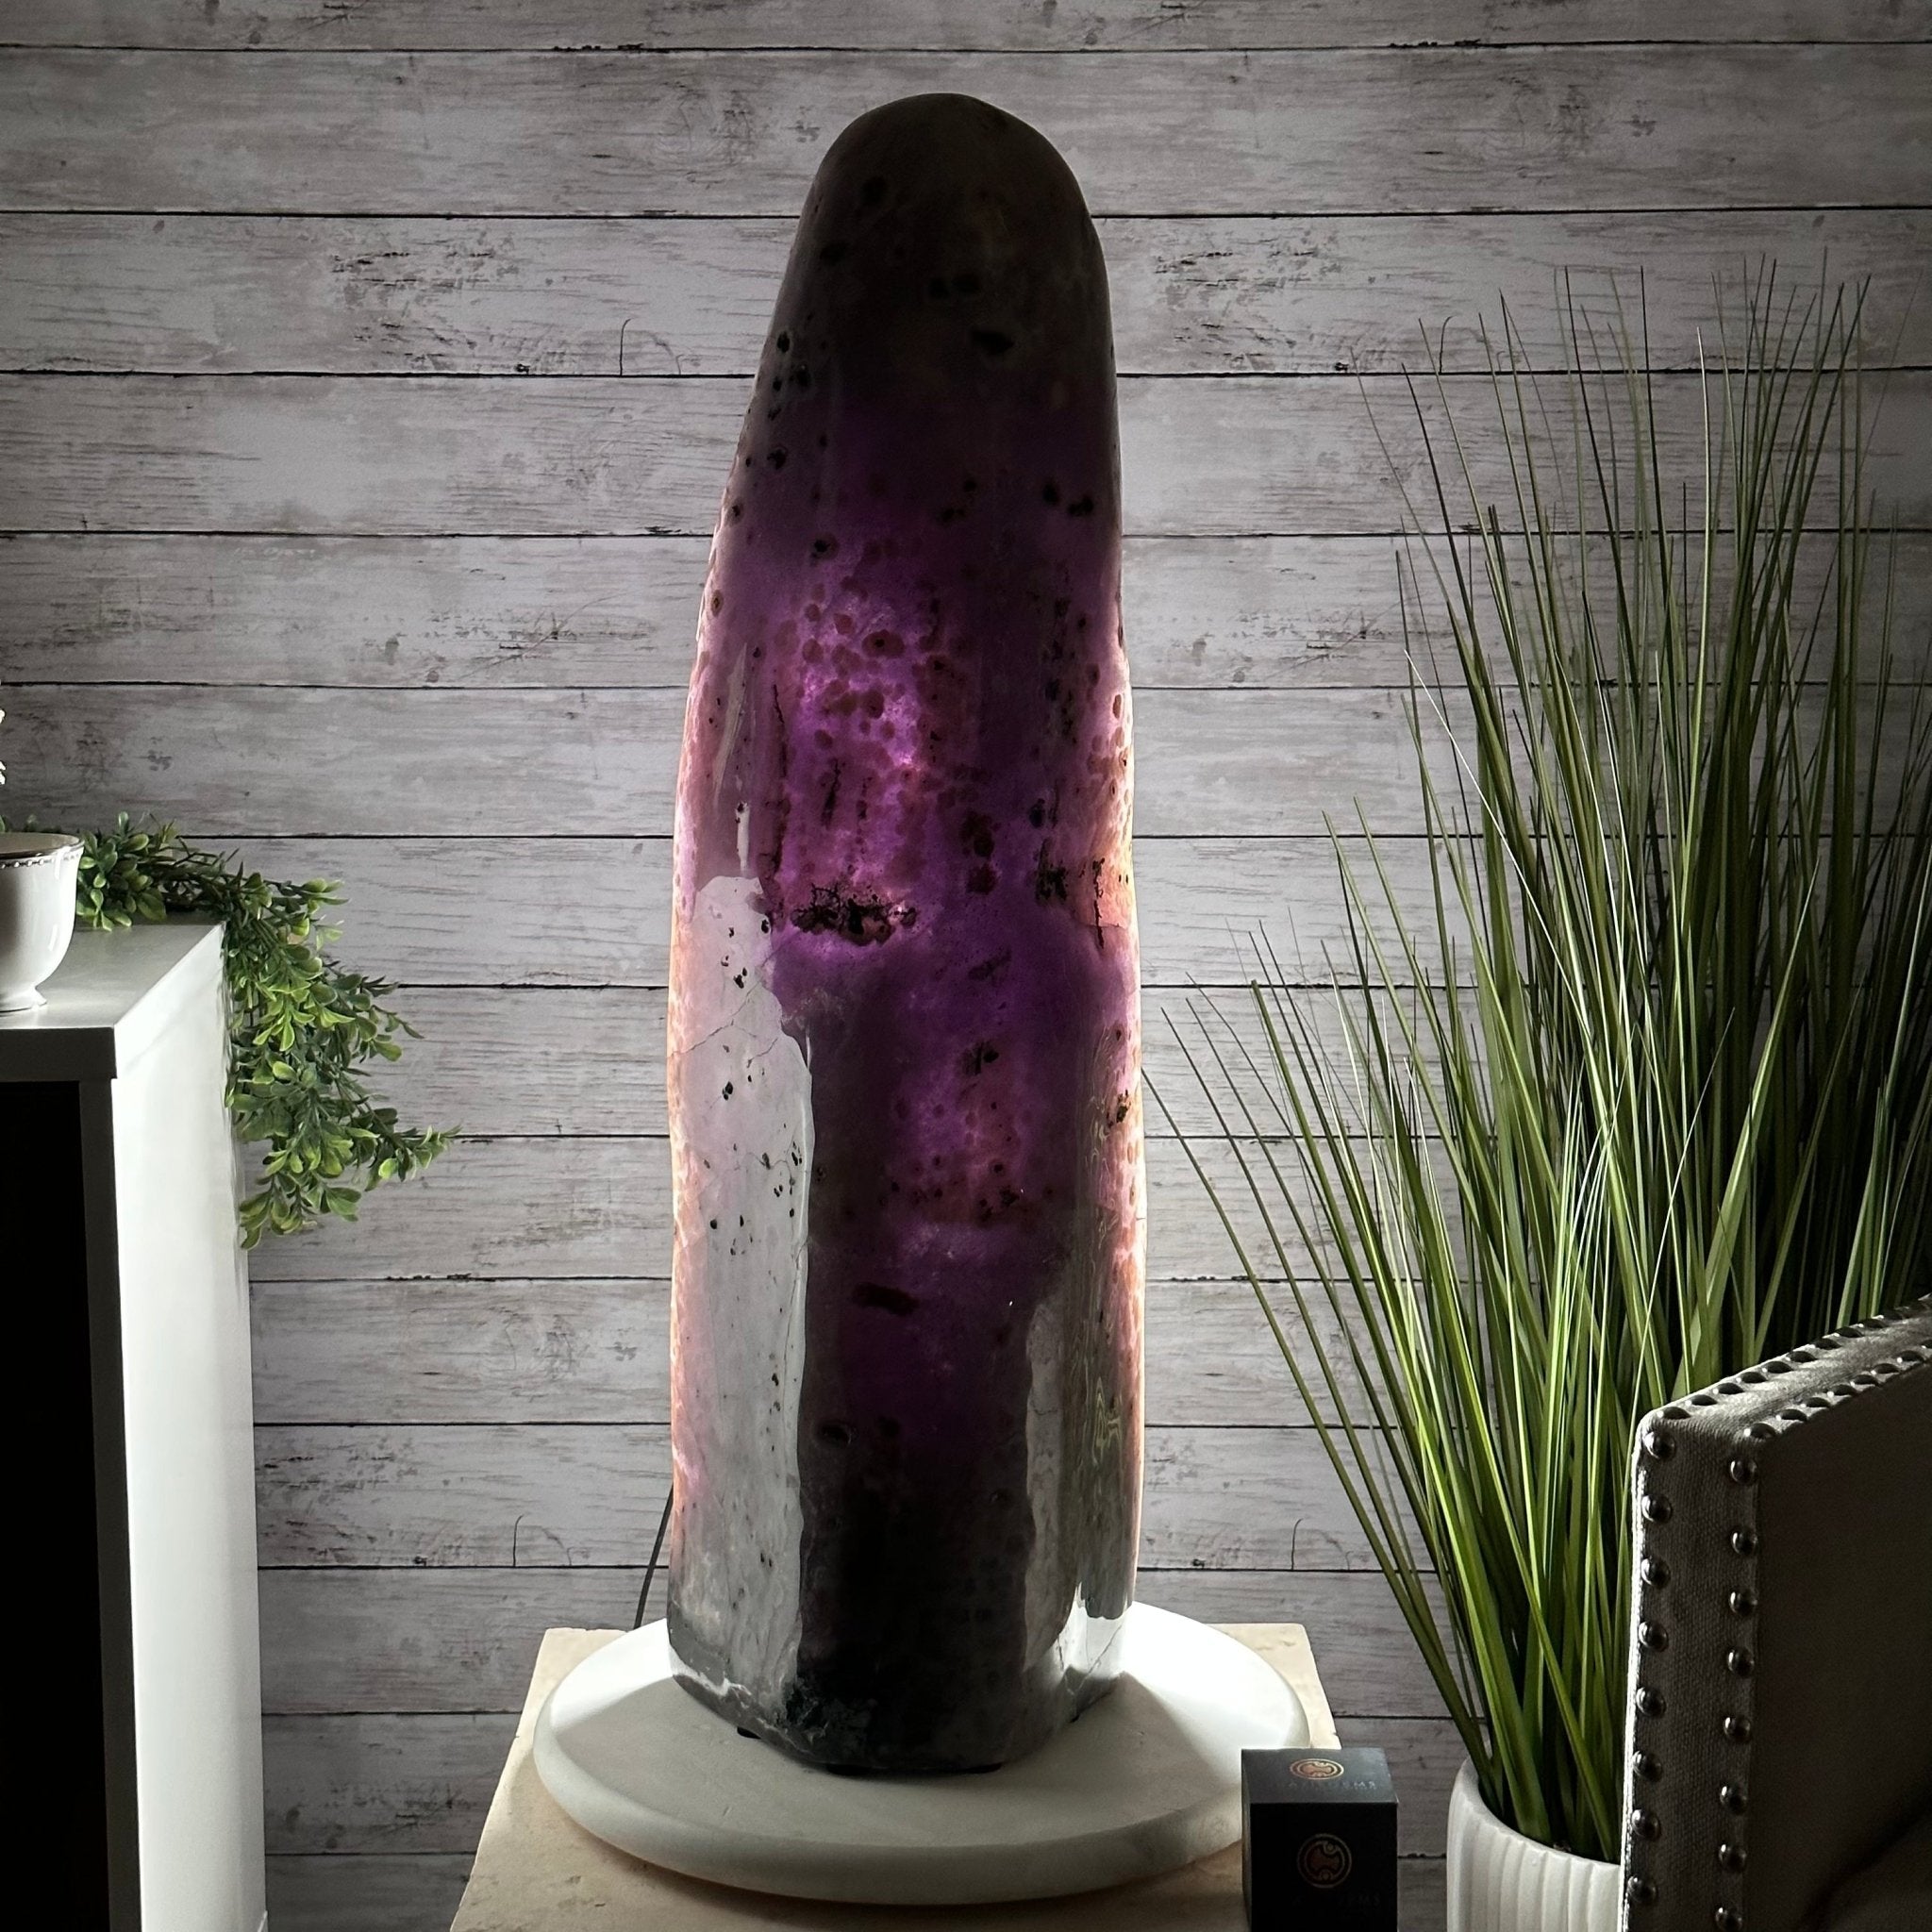 Extra Plus Quality Polished Brazilian Amethyst Cathedral, 81.7 lbs & 24" tall Model #5602-0055 by Brazil Gems - Brazil GemsBrazil GemsExtra Plus Quality Polished Brazilian Amethyst Cathedral, 81.7 lbs & 24" tall Model #5602-0055 by Brazil GemsPolished Cathedrals5602-0055